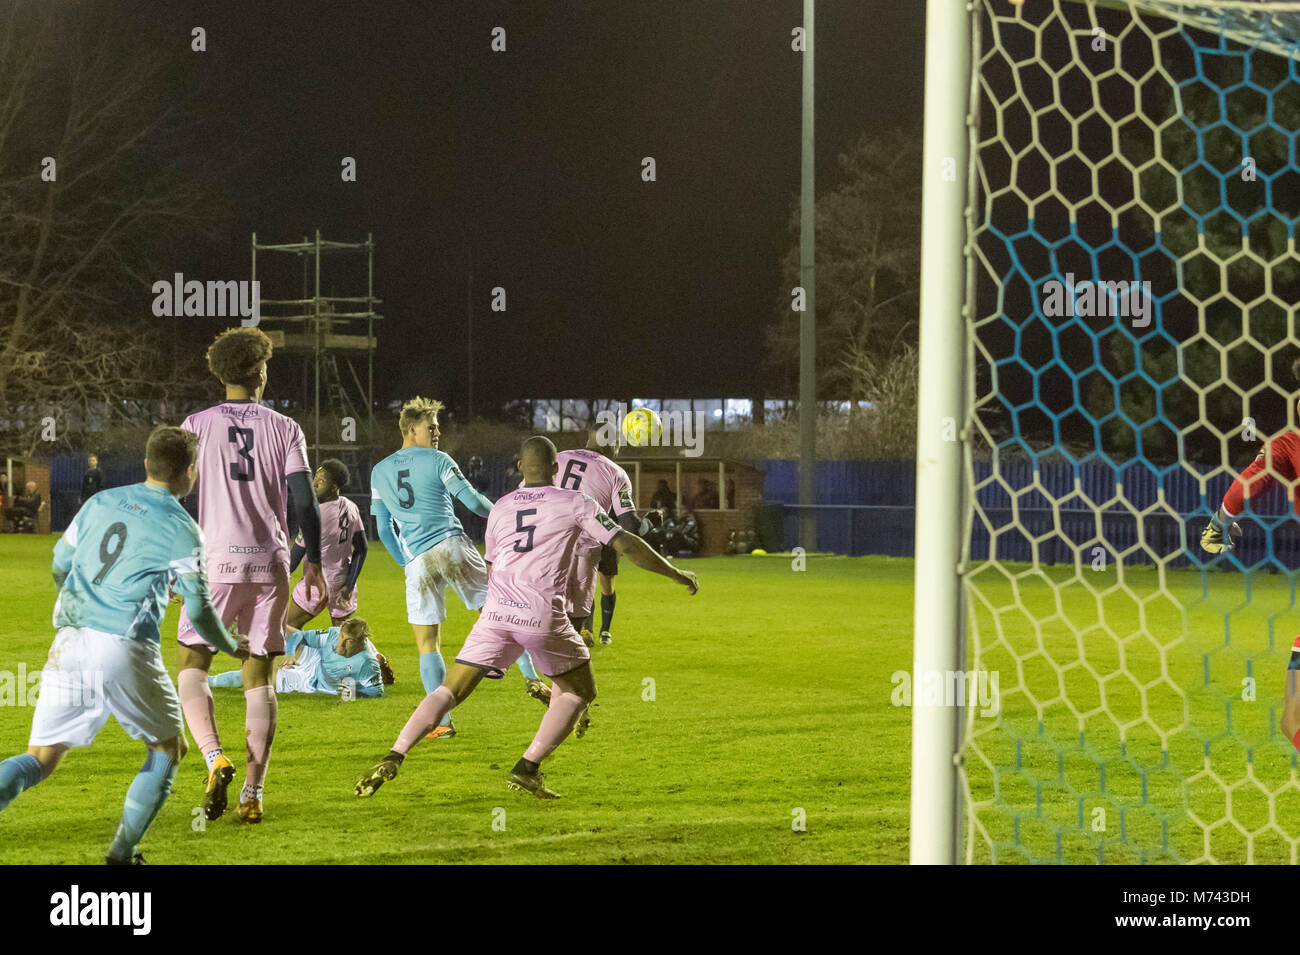 Brentwood, 8th March 2018, Brentwood FC (0) vs Dulwich Hamlets FC (1) in the Velocity Trophy Quarter Final: Anthony Archeampon (6) of Dulwich Hamlets heads the ball on a scramble round Dulwich Hamlets goal mouth Credit: Ian Davidson/Alamy Live News Stock Photo